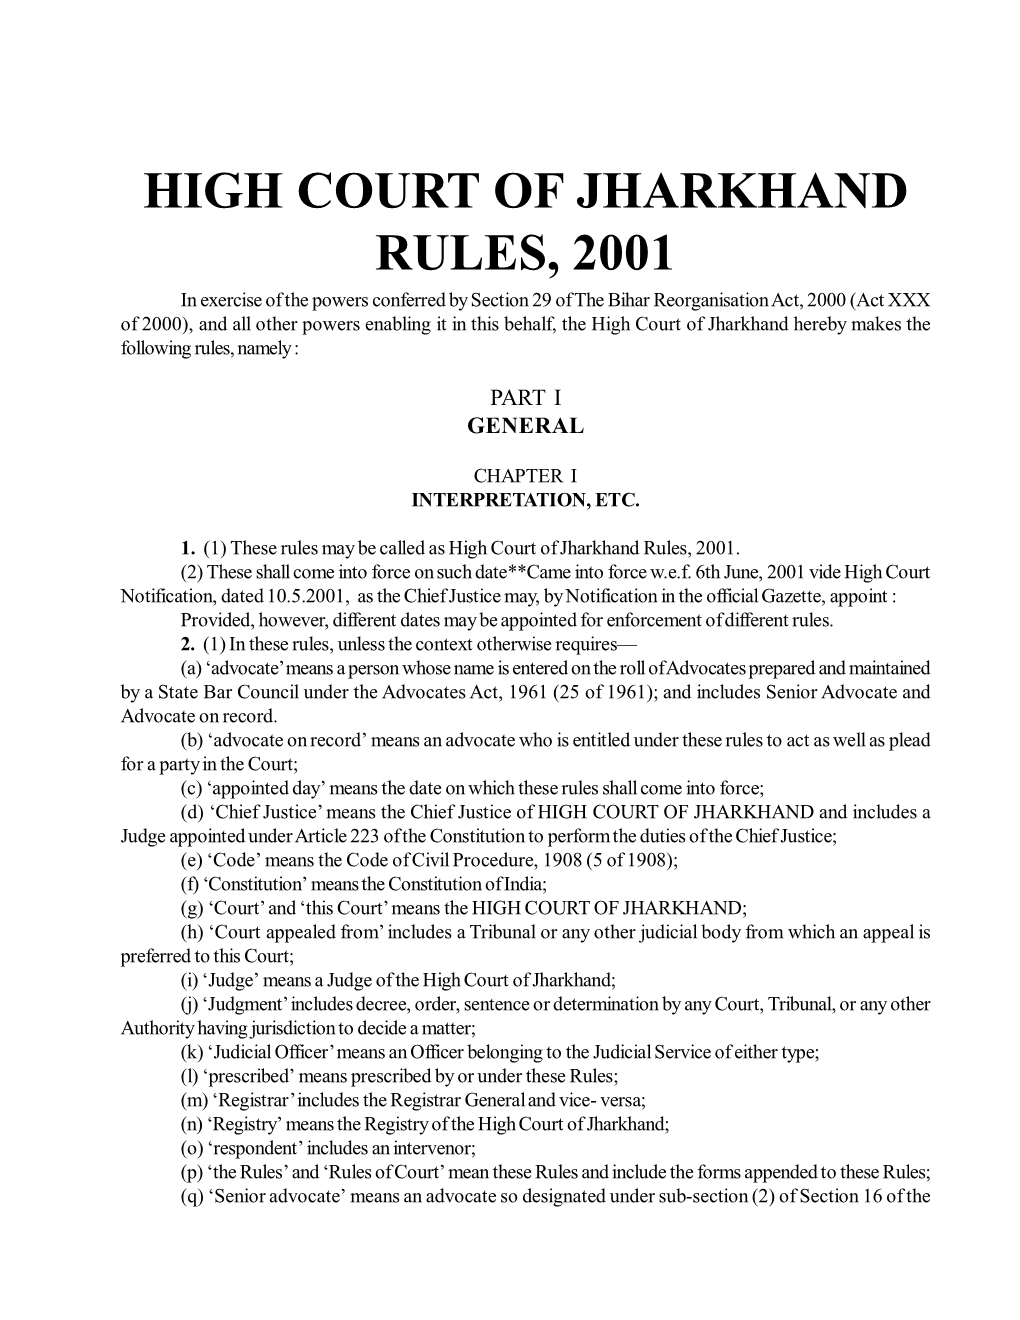 High Court of Jharkhand Rules, 2001